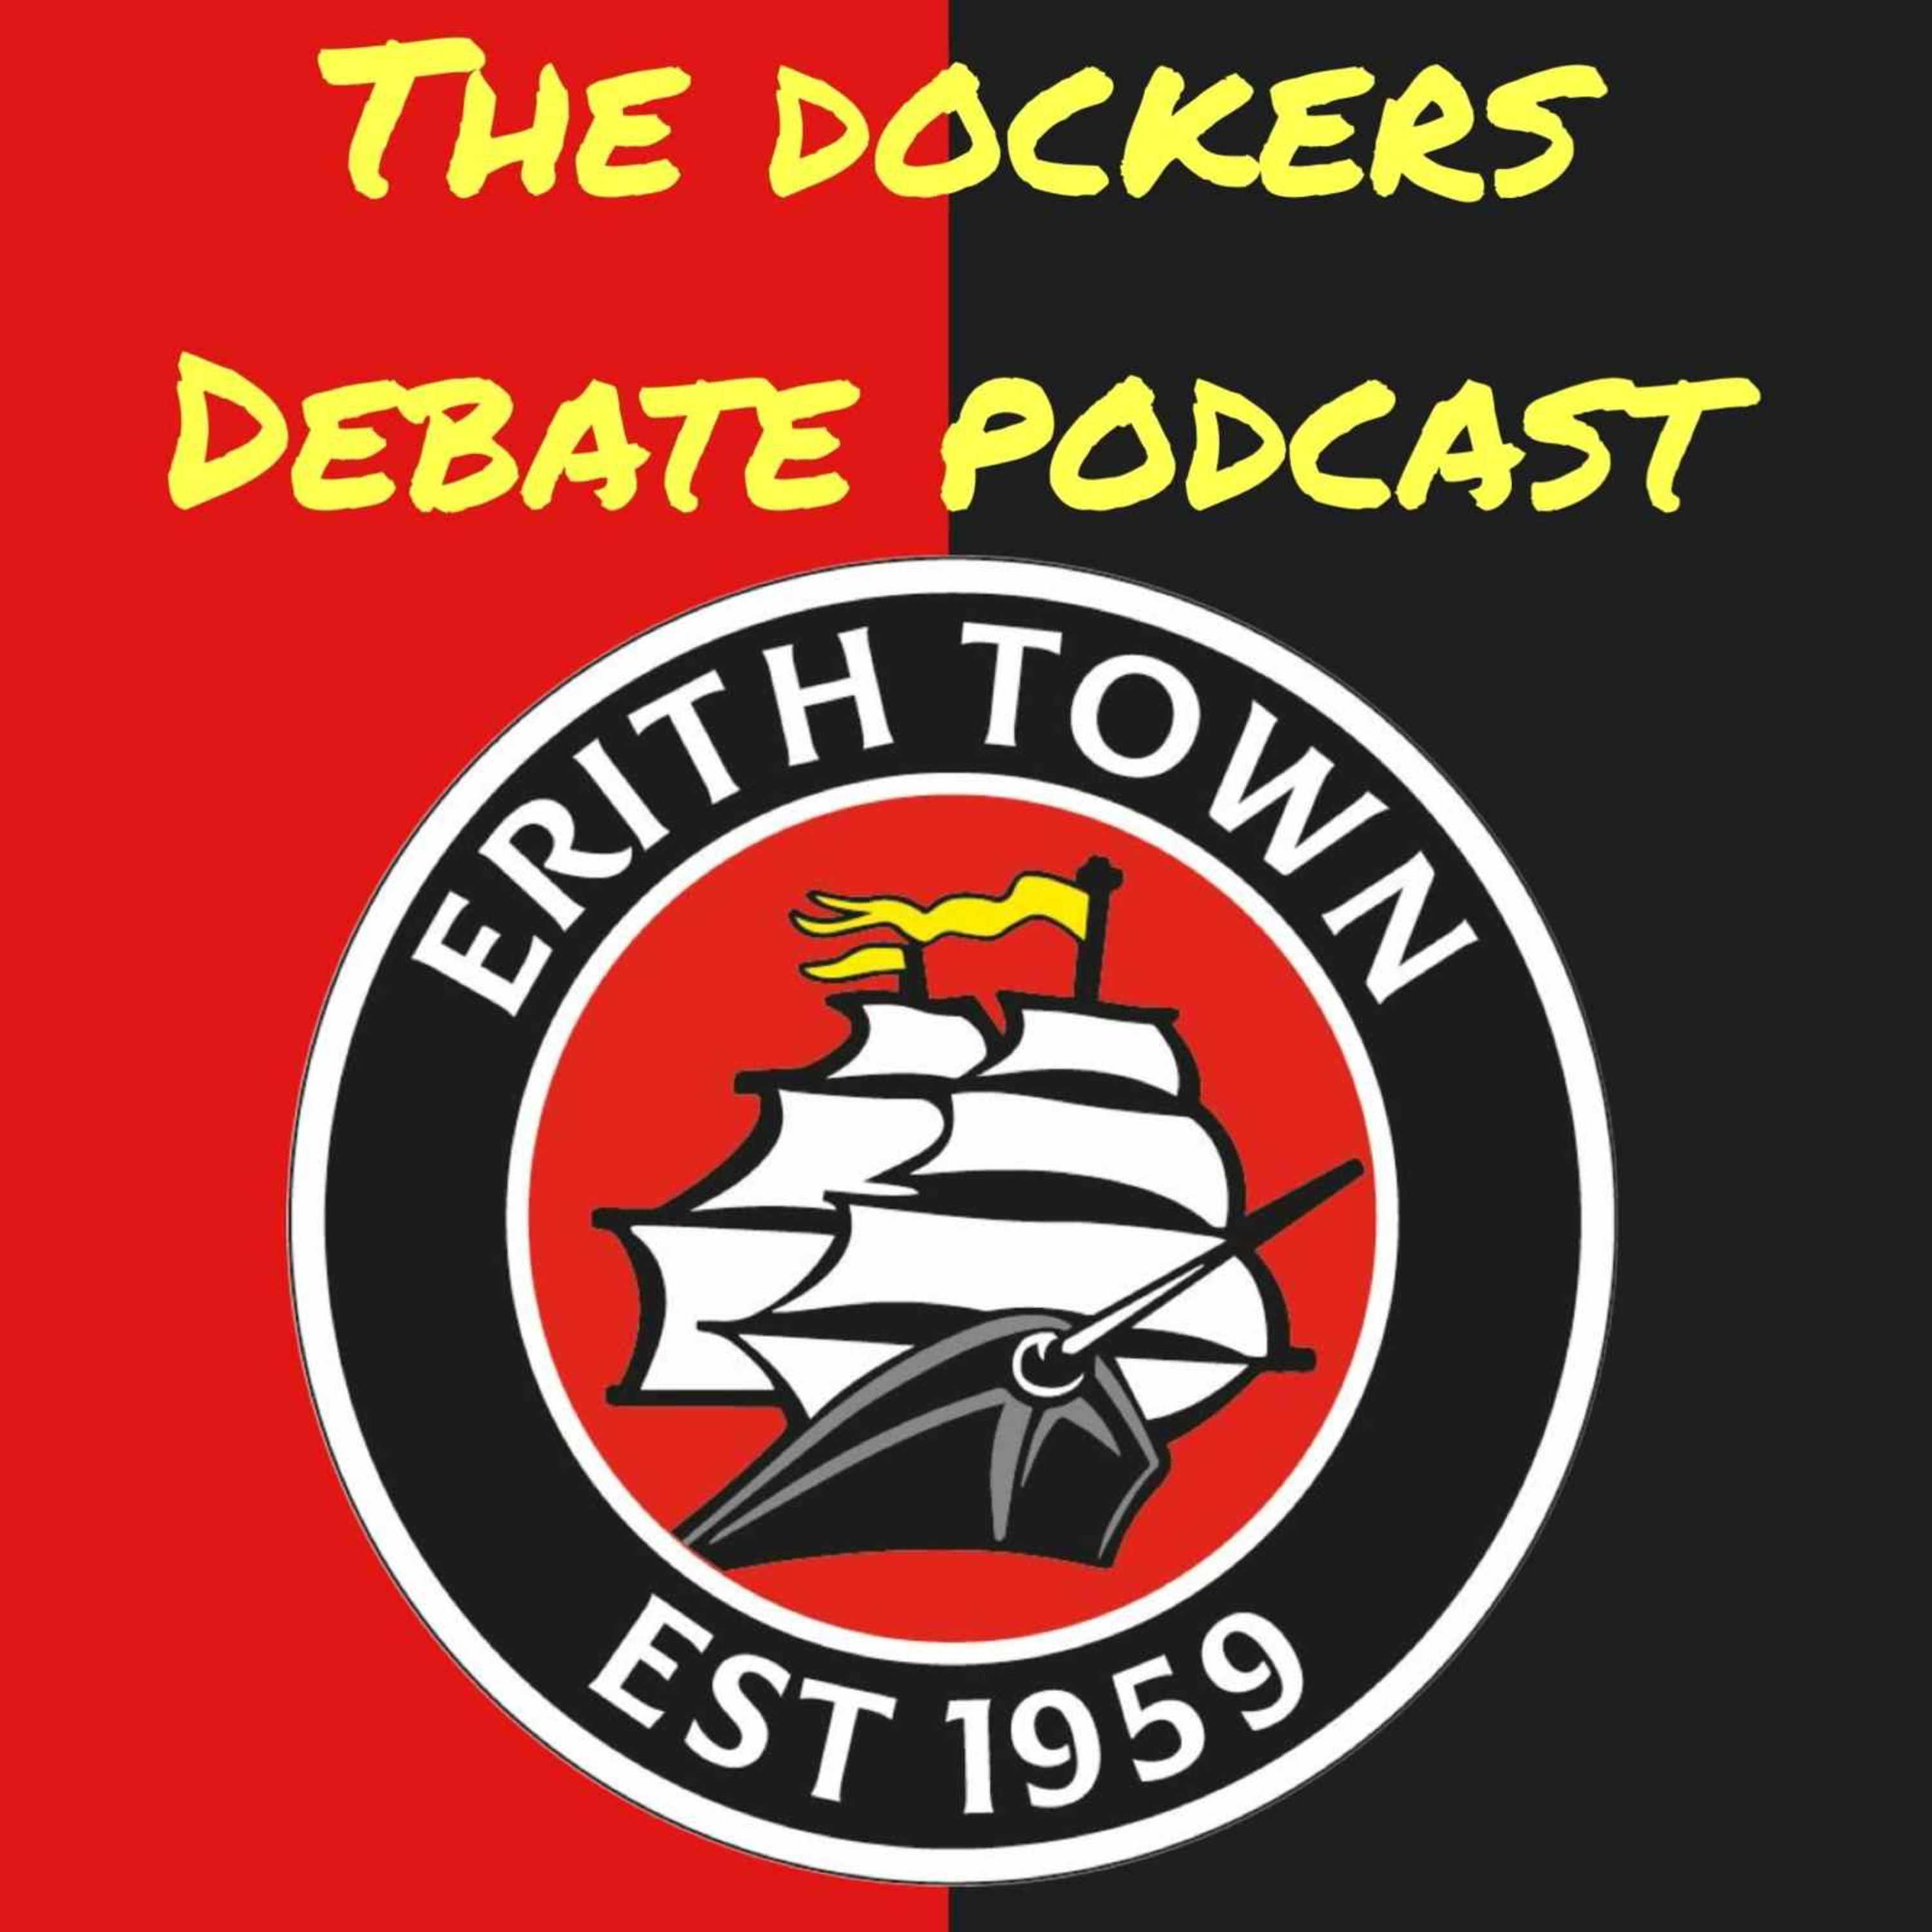 Erith Town FC: ’The Dockers Debate Podcast’ - The MacKenzie Foley interview